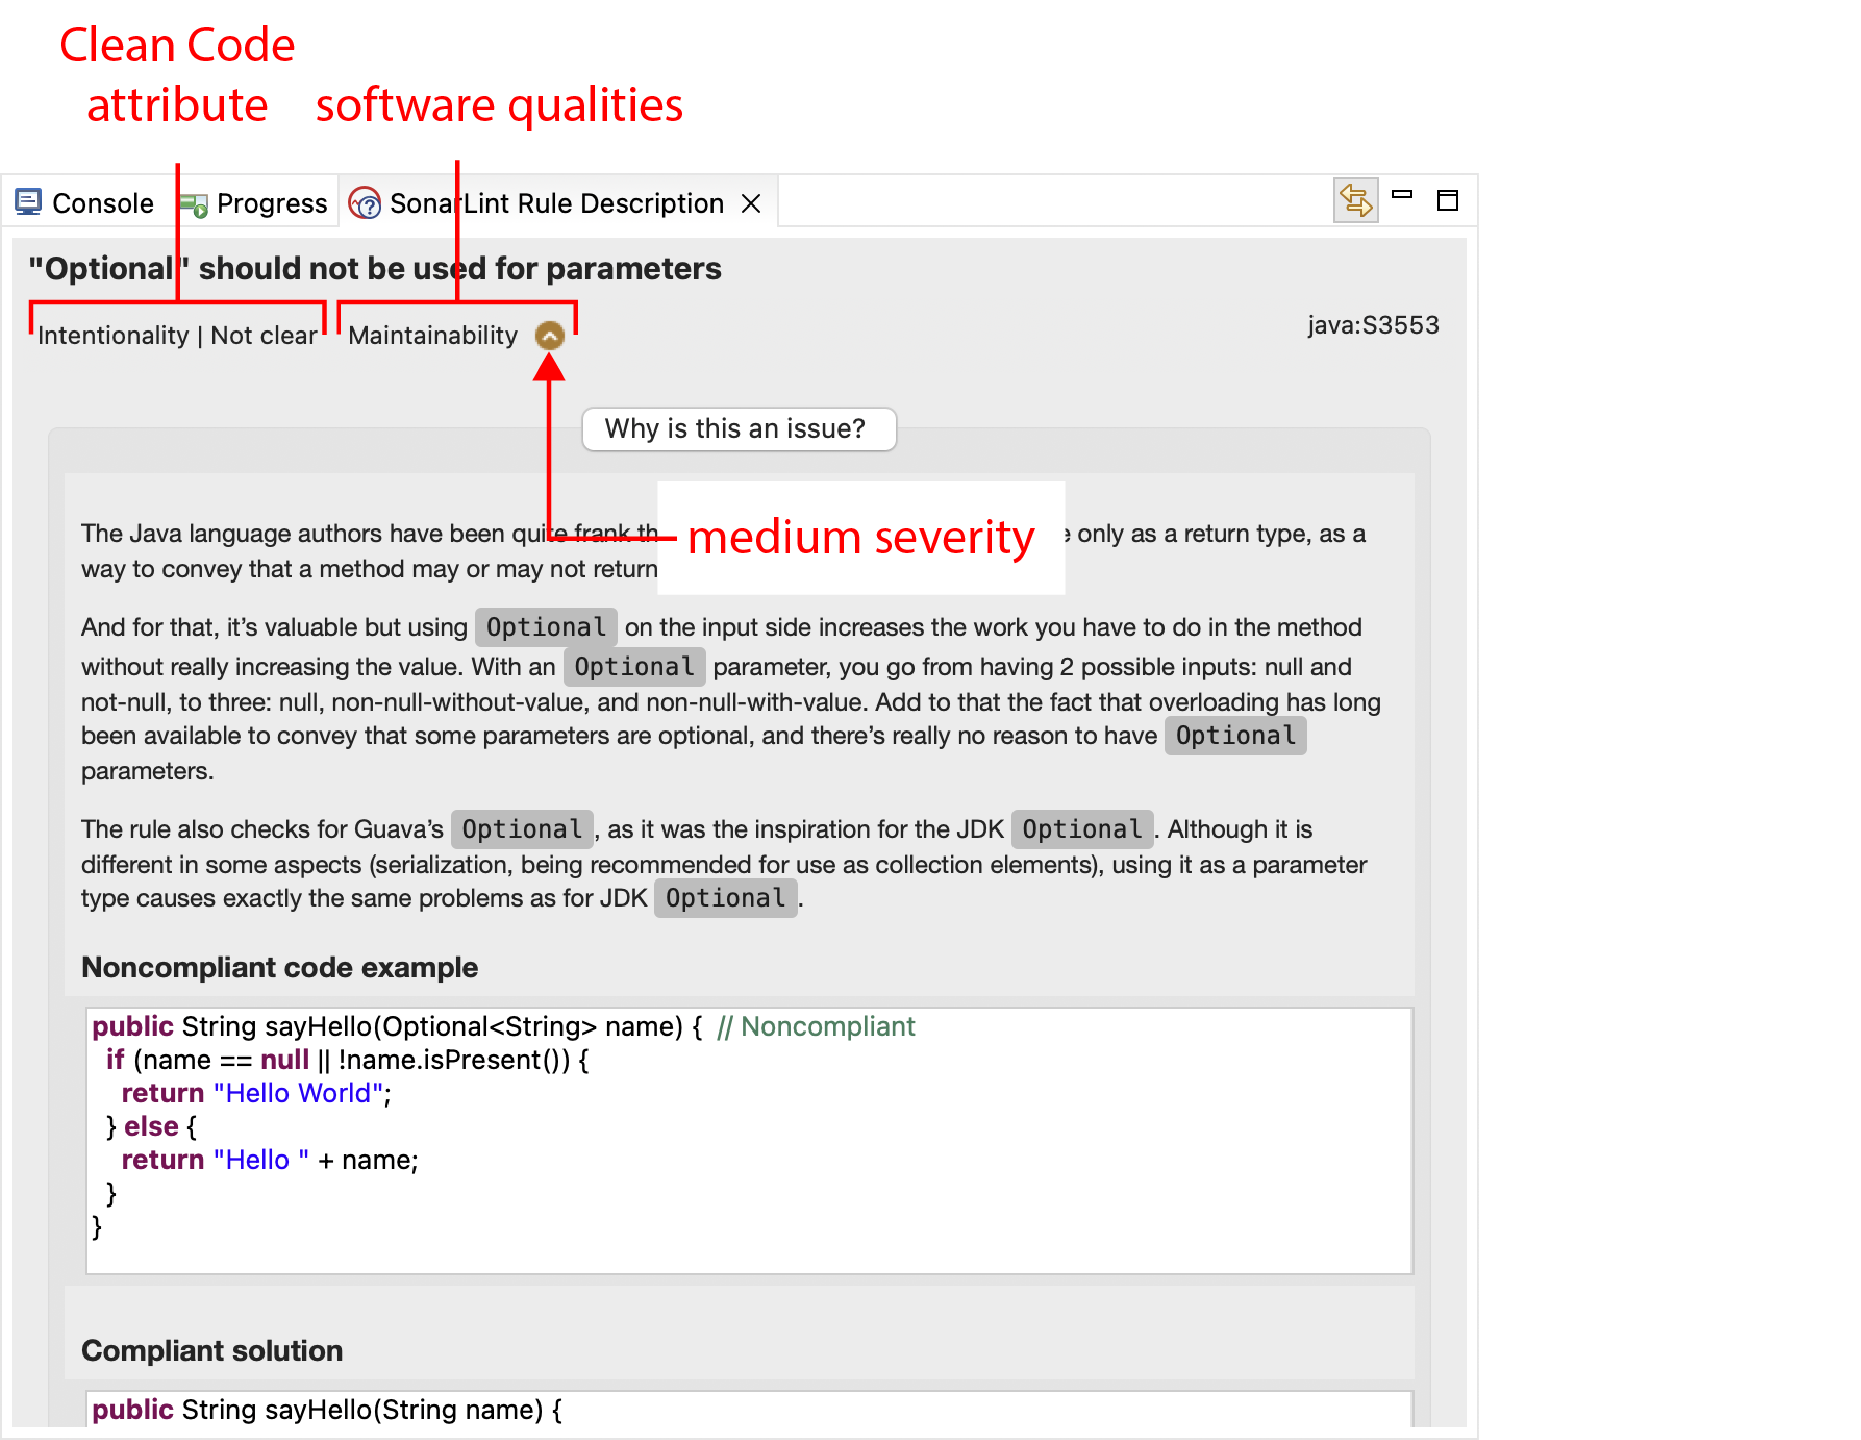 Clean Code attributes and software qualities as they appear in the SonarLint Rule Description view. 